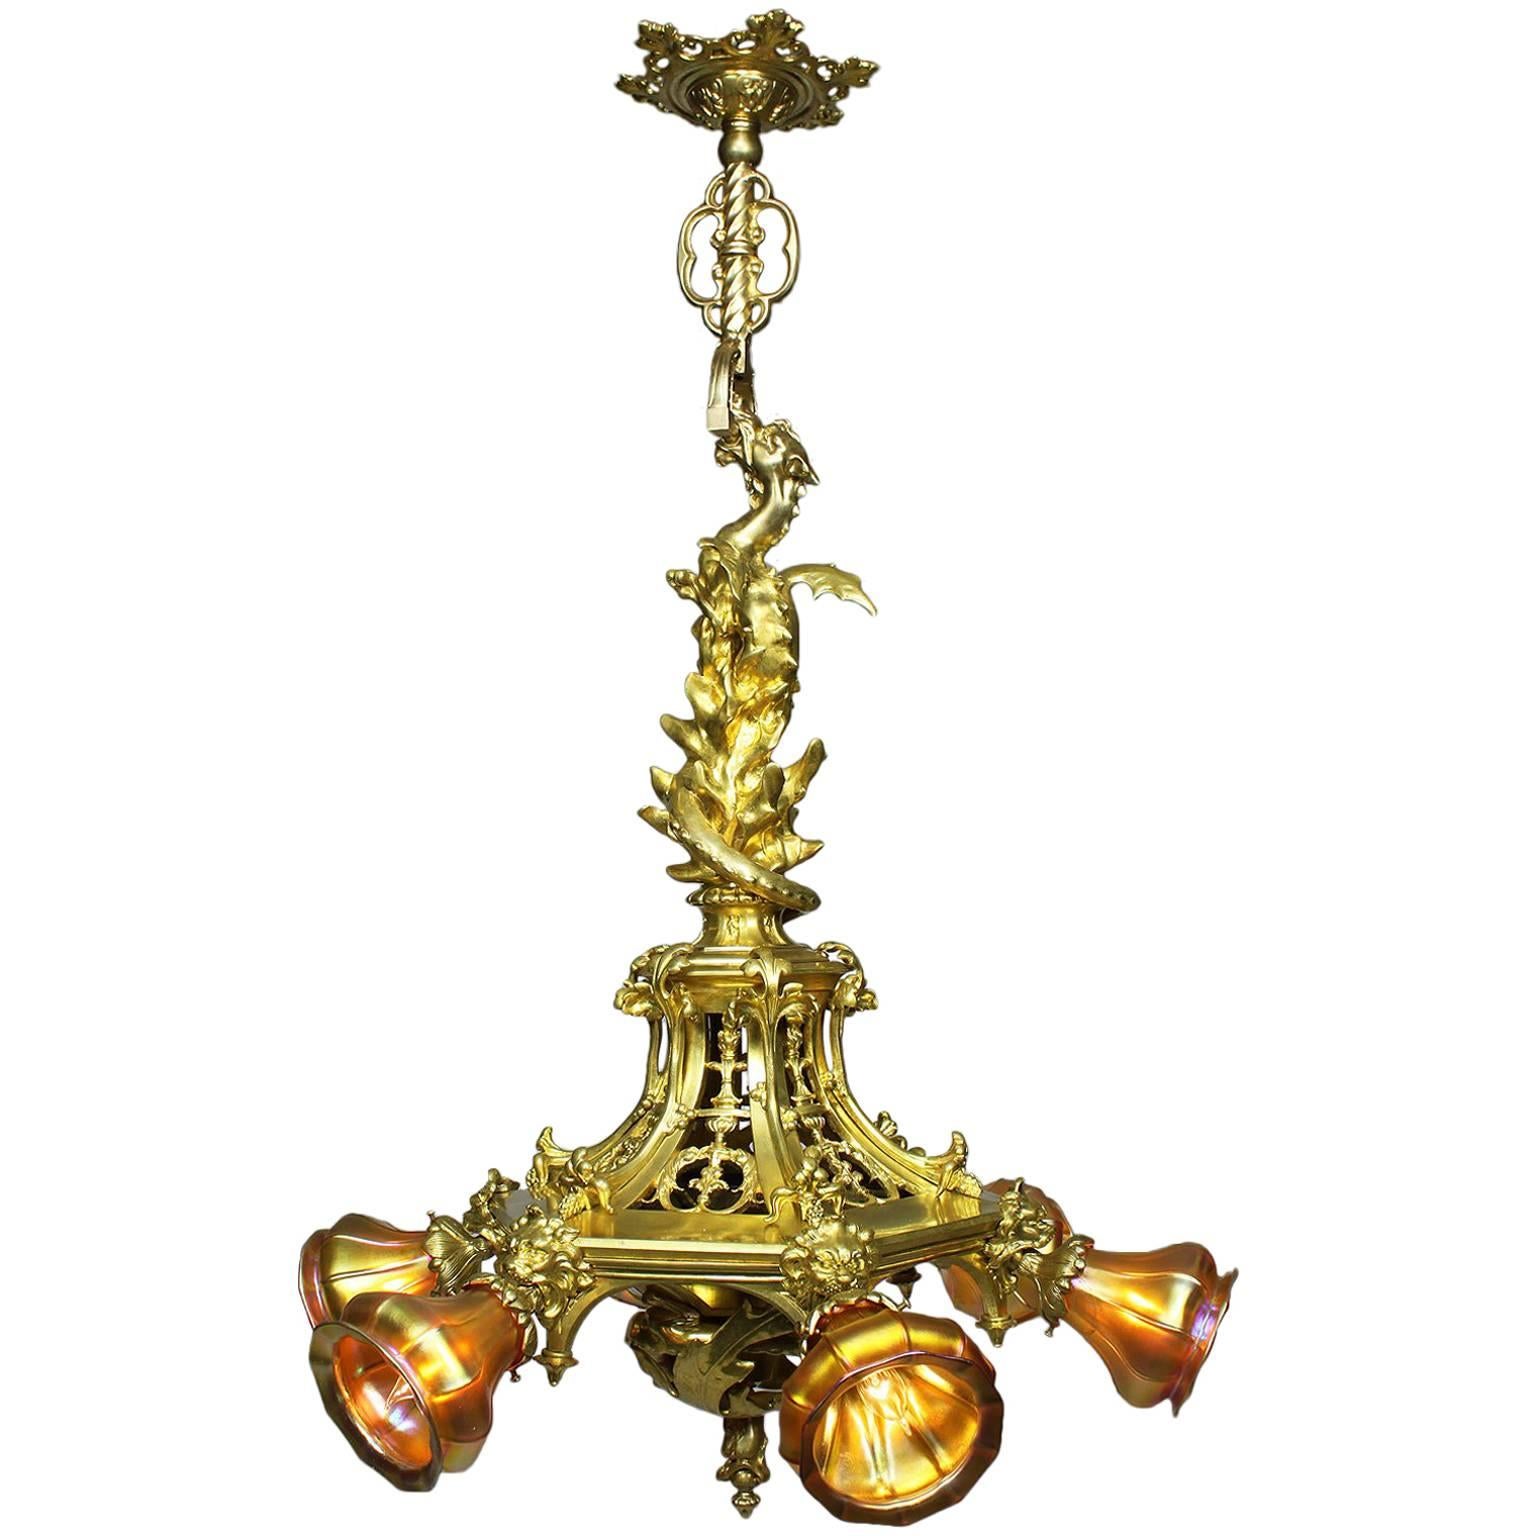 American Gothic-Revival Gilt-Bronze "Dragon" Chandelier in the Manner of Tiffany